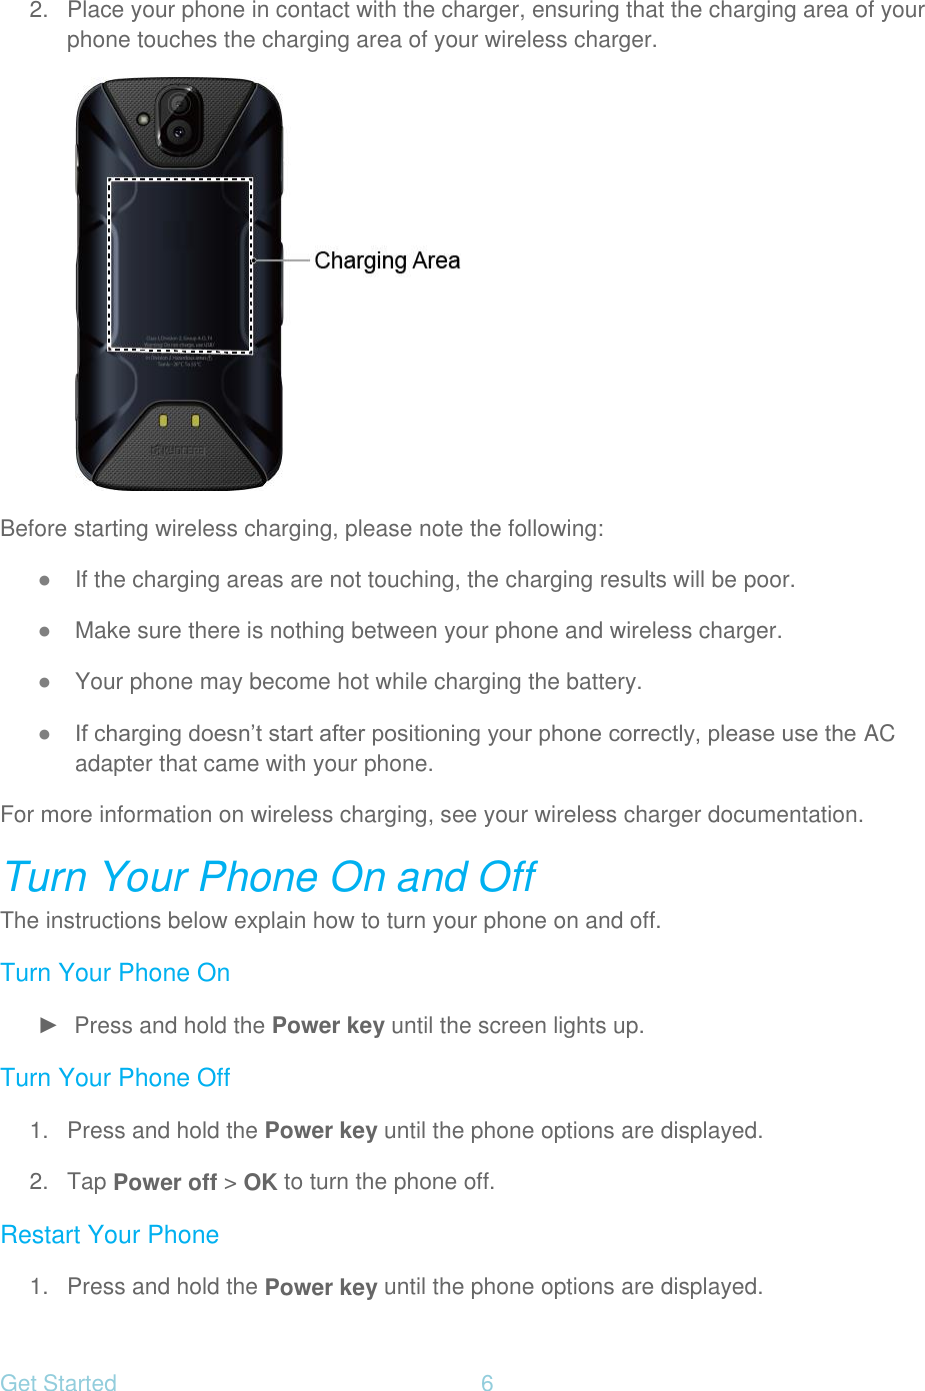 Get Started  6   2.  Place your phone in contact with the charger, ensuring that the charging area of your phone touches the charging area of your wireless charger.  Before starting wireless charging, please note the following: ● If the charging areas are not touching, the charging results will be poor. ● Make sure there is nothing between your phone and wireless charger. ● Your phone may become hot while charging the battery. ● If charging doesn’t start after positioning your phone correctly, please use the AC adapter that came with your phone. For more information on wireless charging, see your wireless charger documentation. Turn Your Phone On and Off The instructions below explain how to turn your phone on and off. Turn Your Phone On ►  Press and hold the Power key until the screen lights up. Turn Your Phone Off 1.  Press and hold the Power key until the phone options are displayed. 2. Tap Power off &gt; OK to turn the phone off. Restart Your Phone 1.  Press and hold the Power key until the phone options are displayed. 